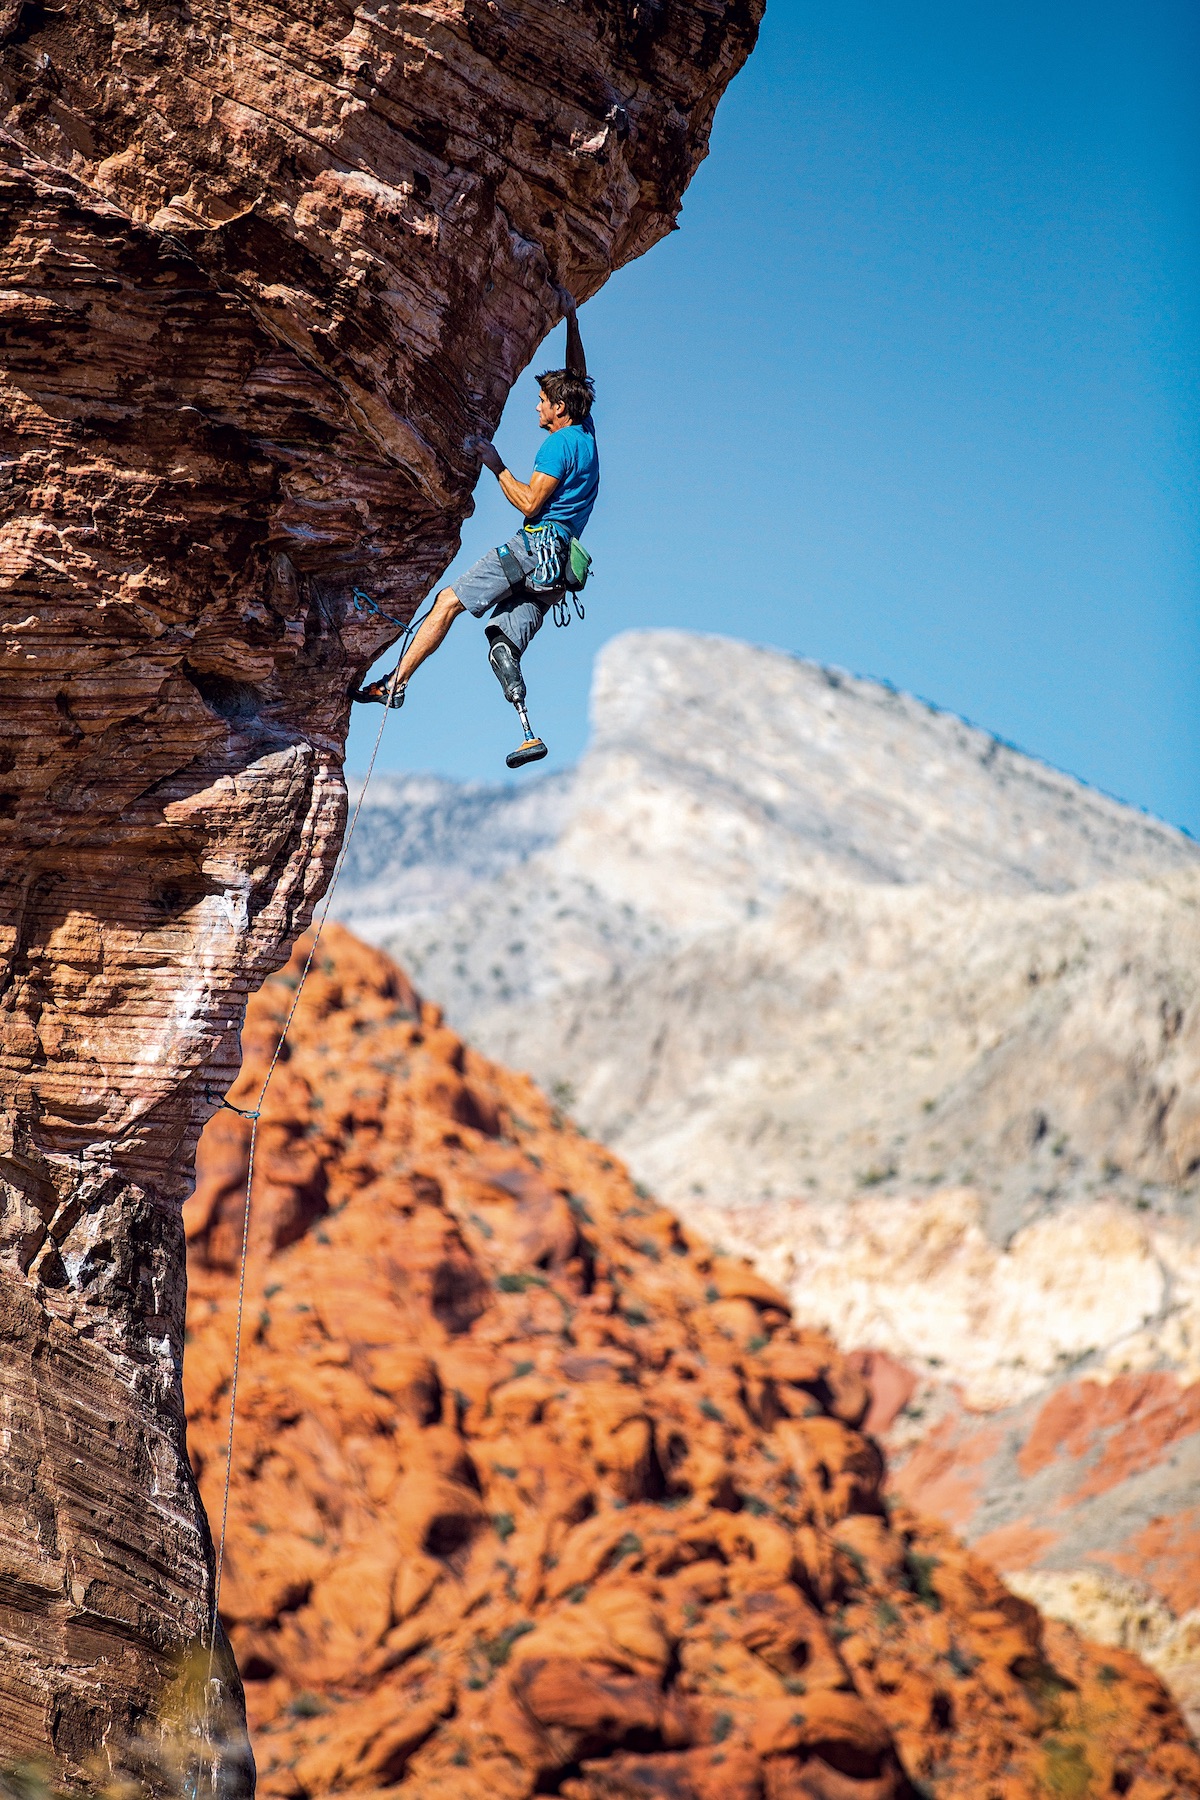 DeMartino leads Caustic (5.11b) in Red Rock Canyon National Recreation Area, Nevada. [Photo] Cameron Maier/Bearcam Media